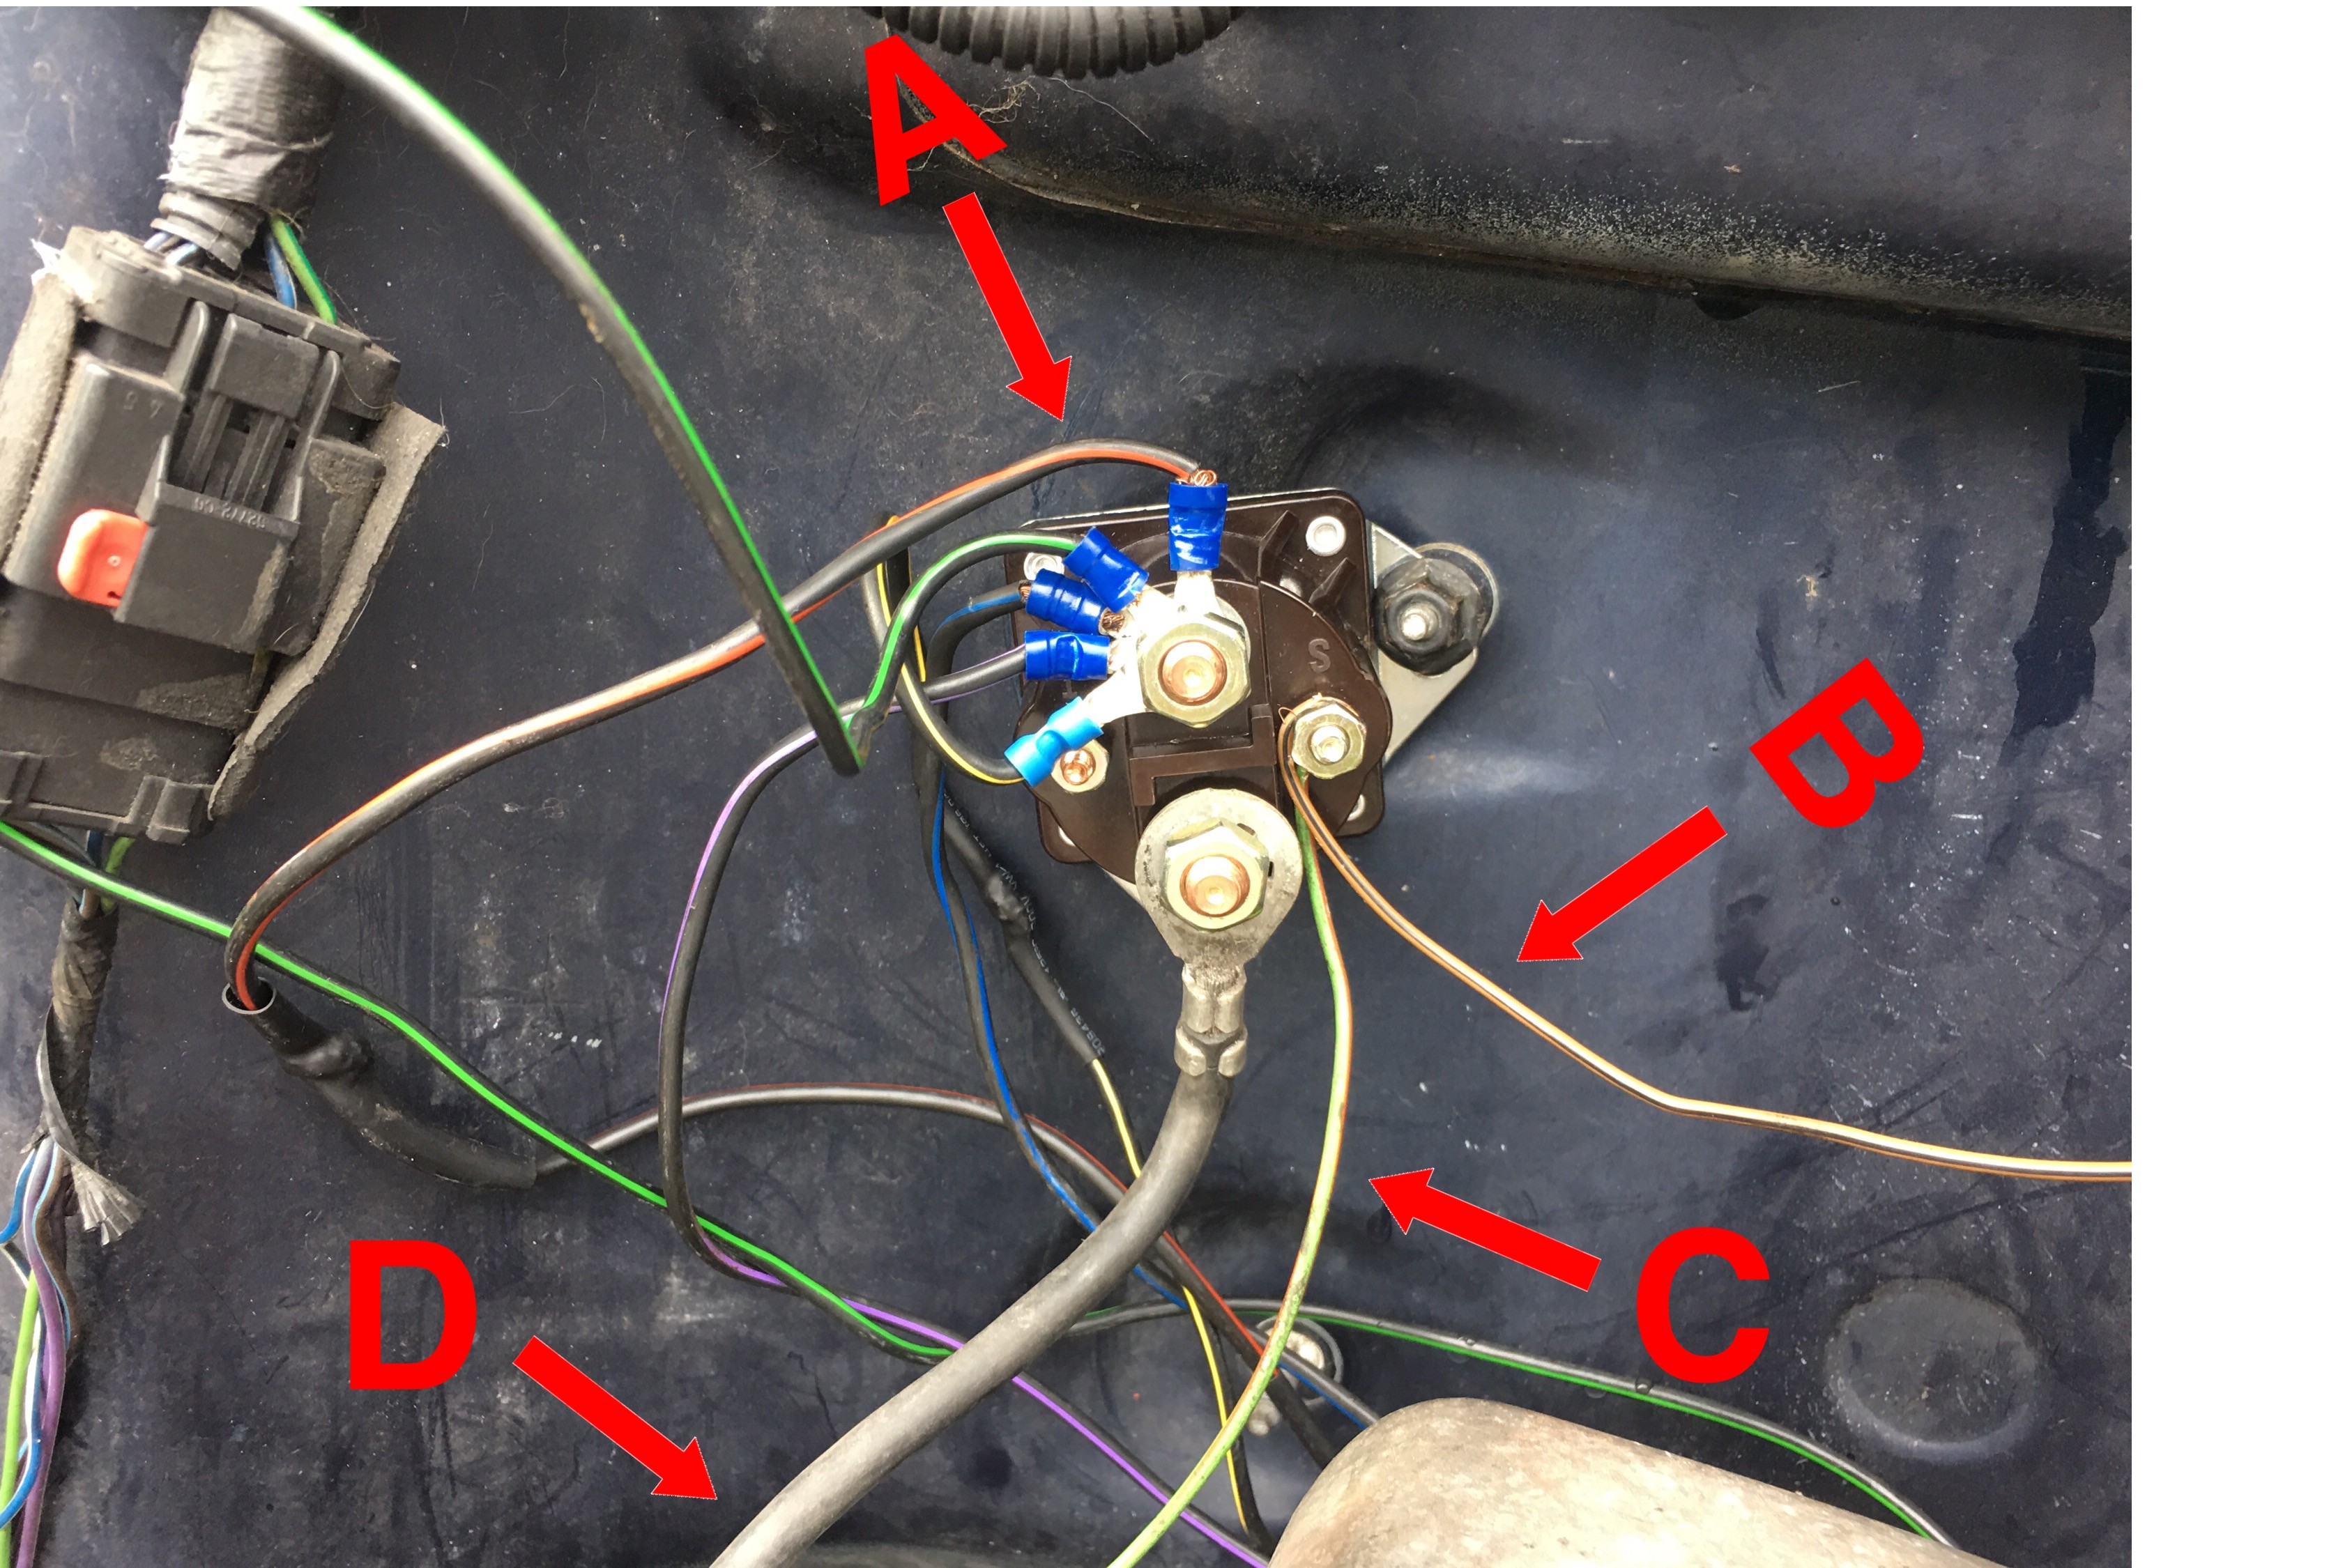 How to Wire In A Starer button On Glow Plugs On A 7.3 Idi Old ford solenoid as Glow Plug Relay for Om617 Amateur In Of How to Wire In A Starer button On Glow Plugs On A 7.3 Idi